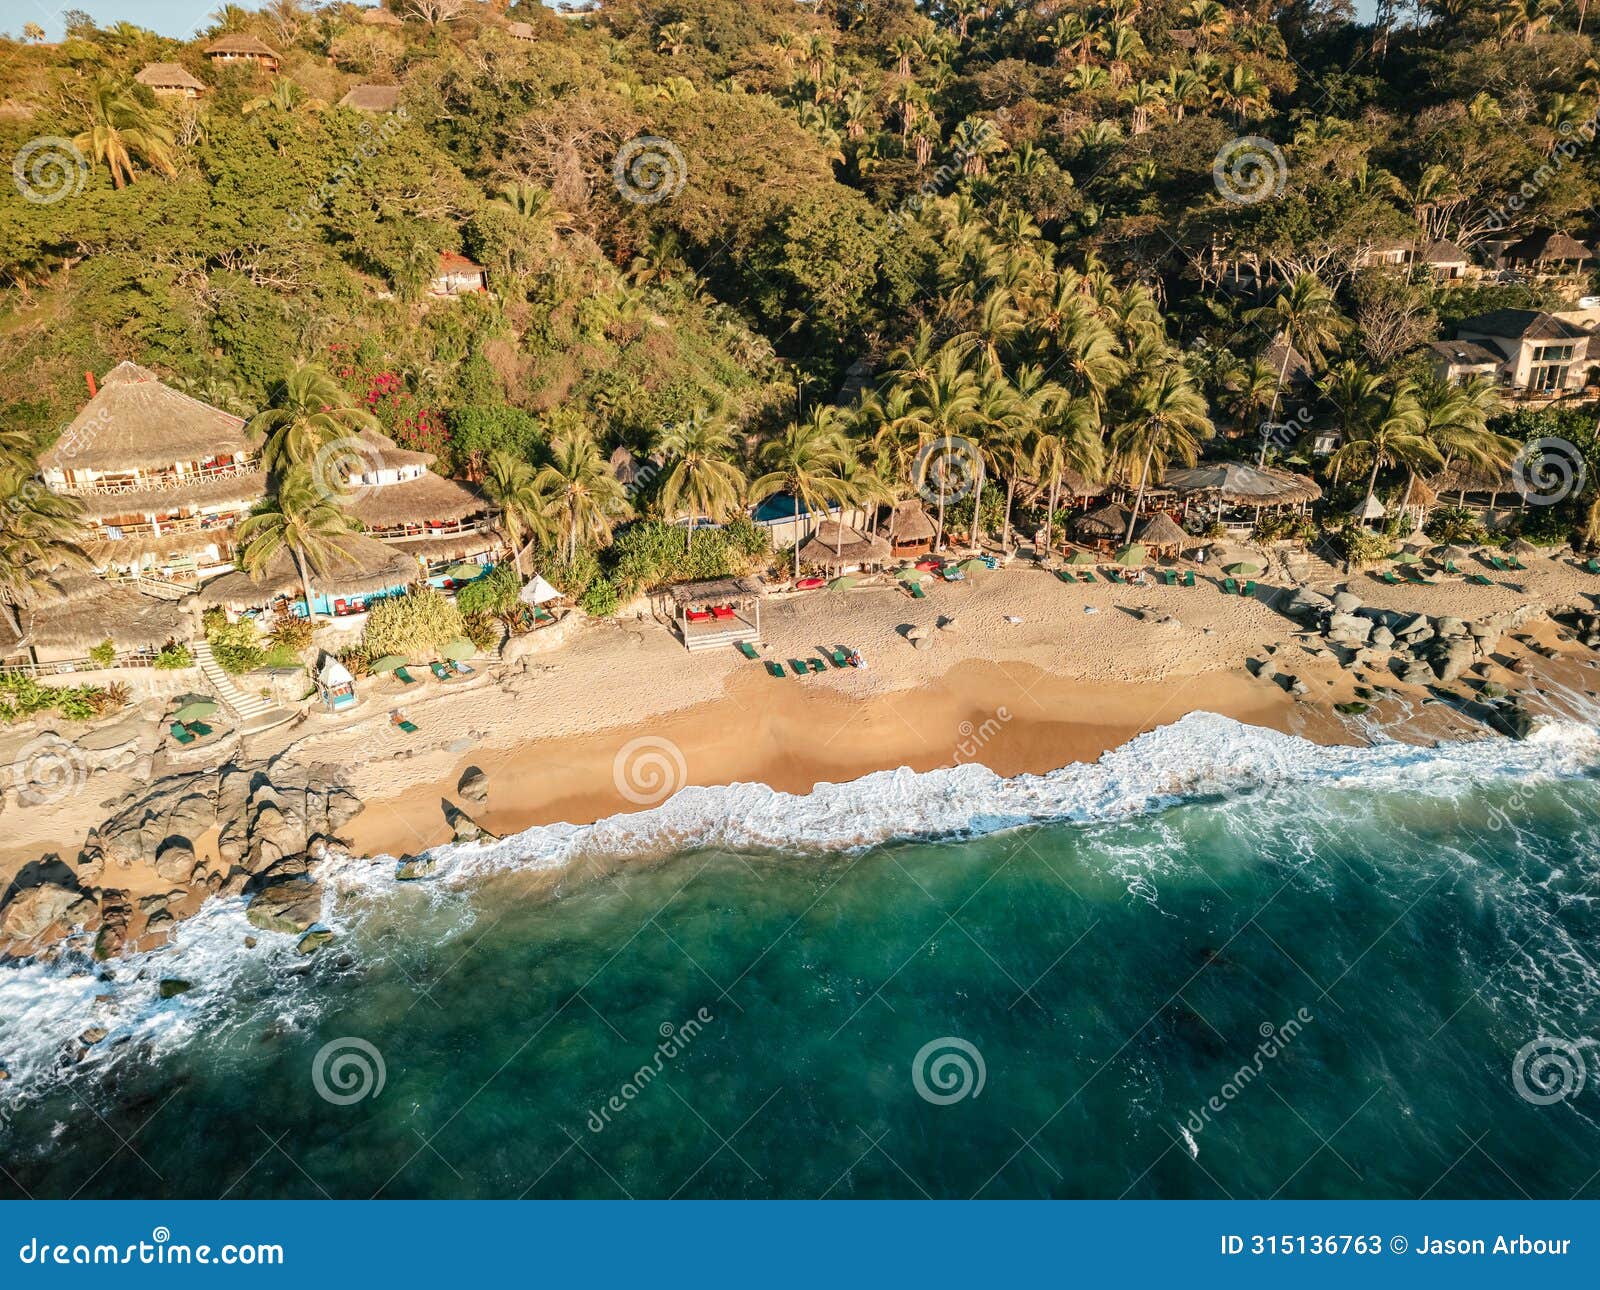 playa escondido in sayulita mexico nayarit where the bachelor was filmed. aerial view at sunset